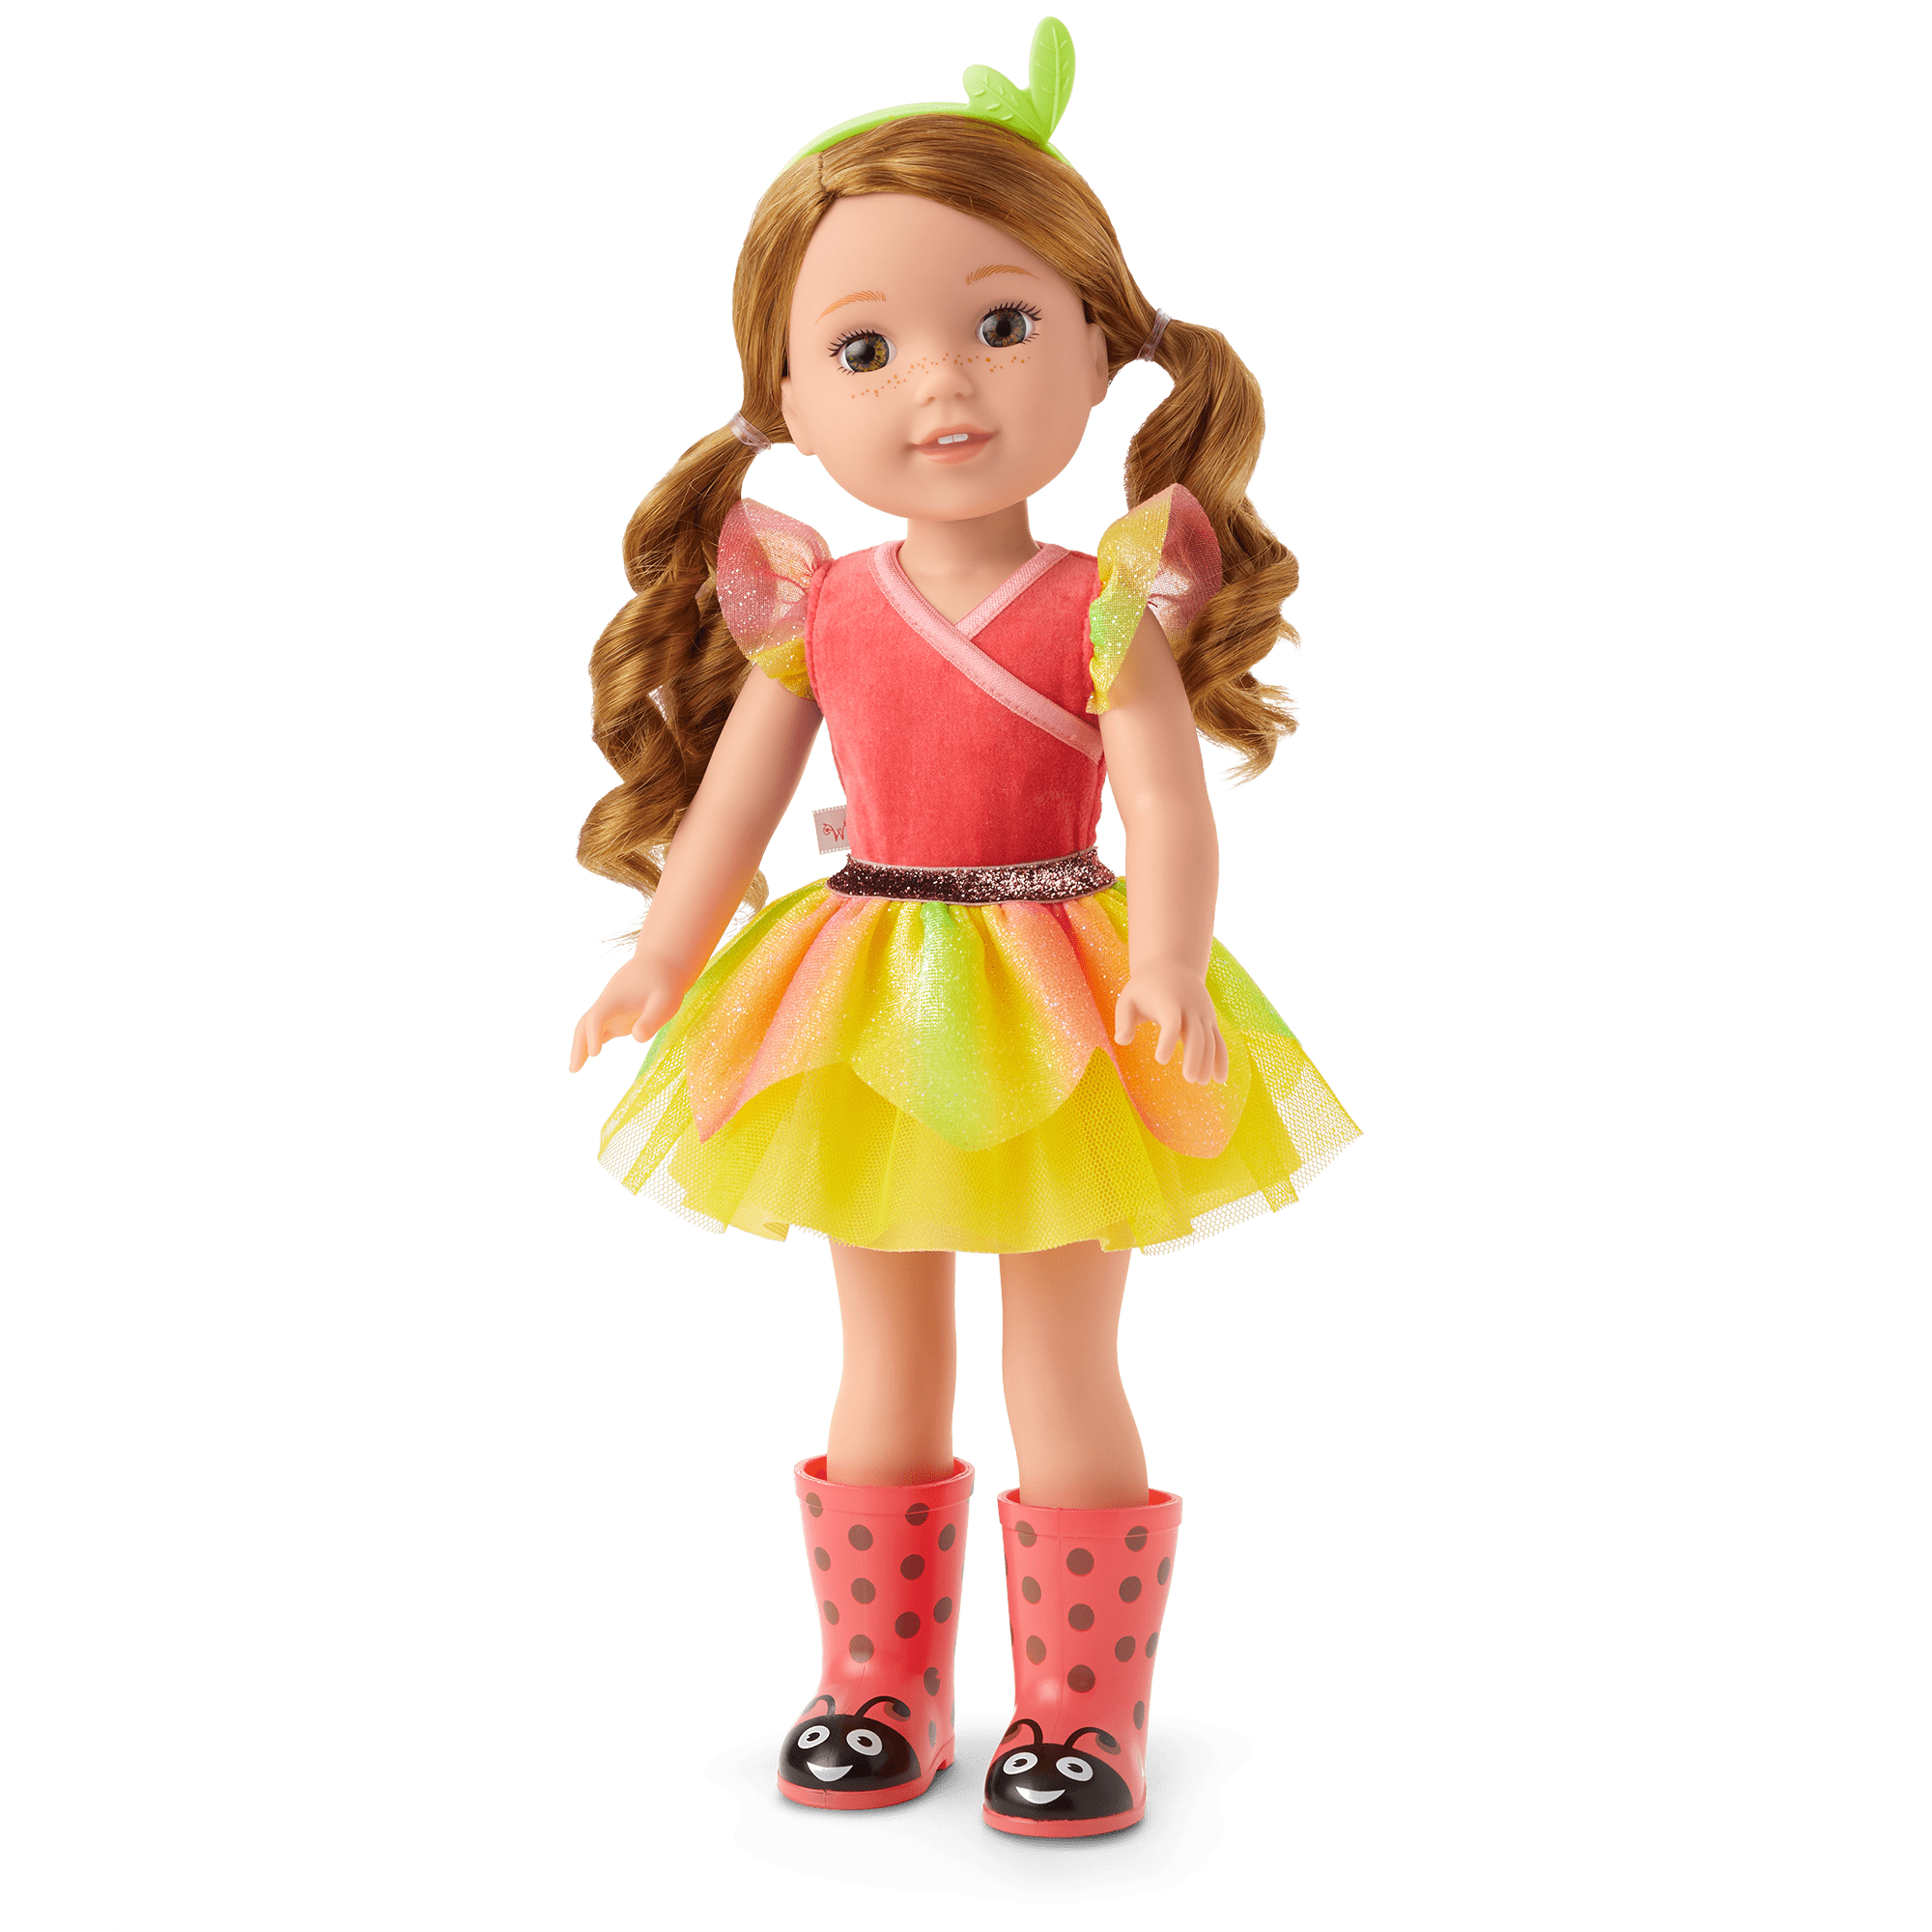 14.5" American Girl WellieWishers Willa Doll (green/pink/red/yellow) $45.50 + Free Shipping